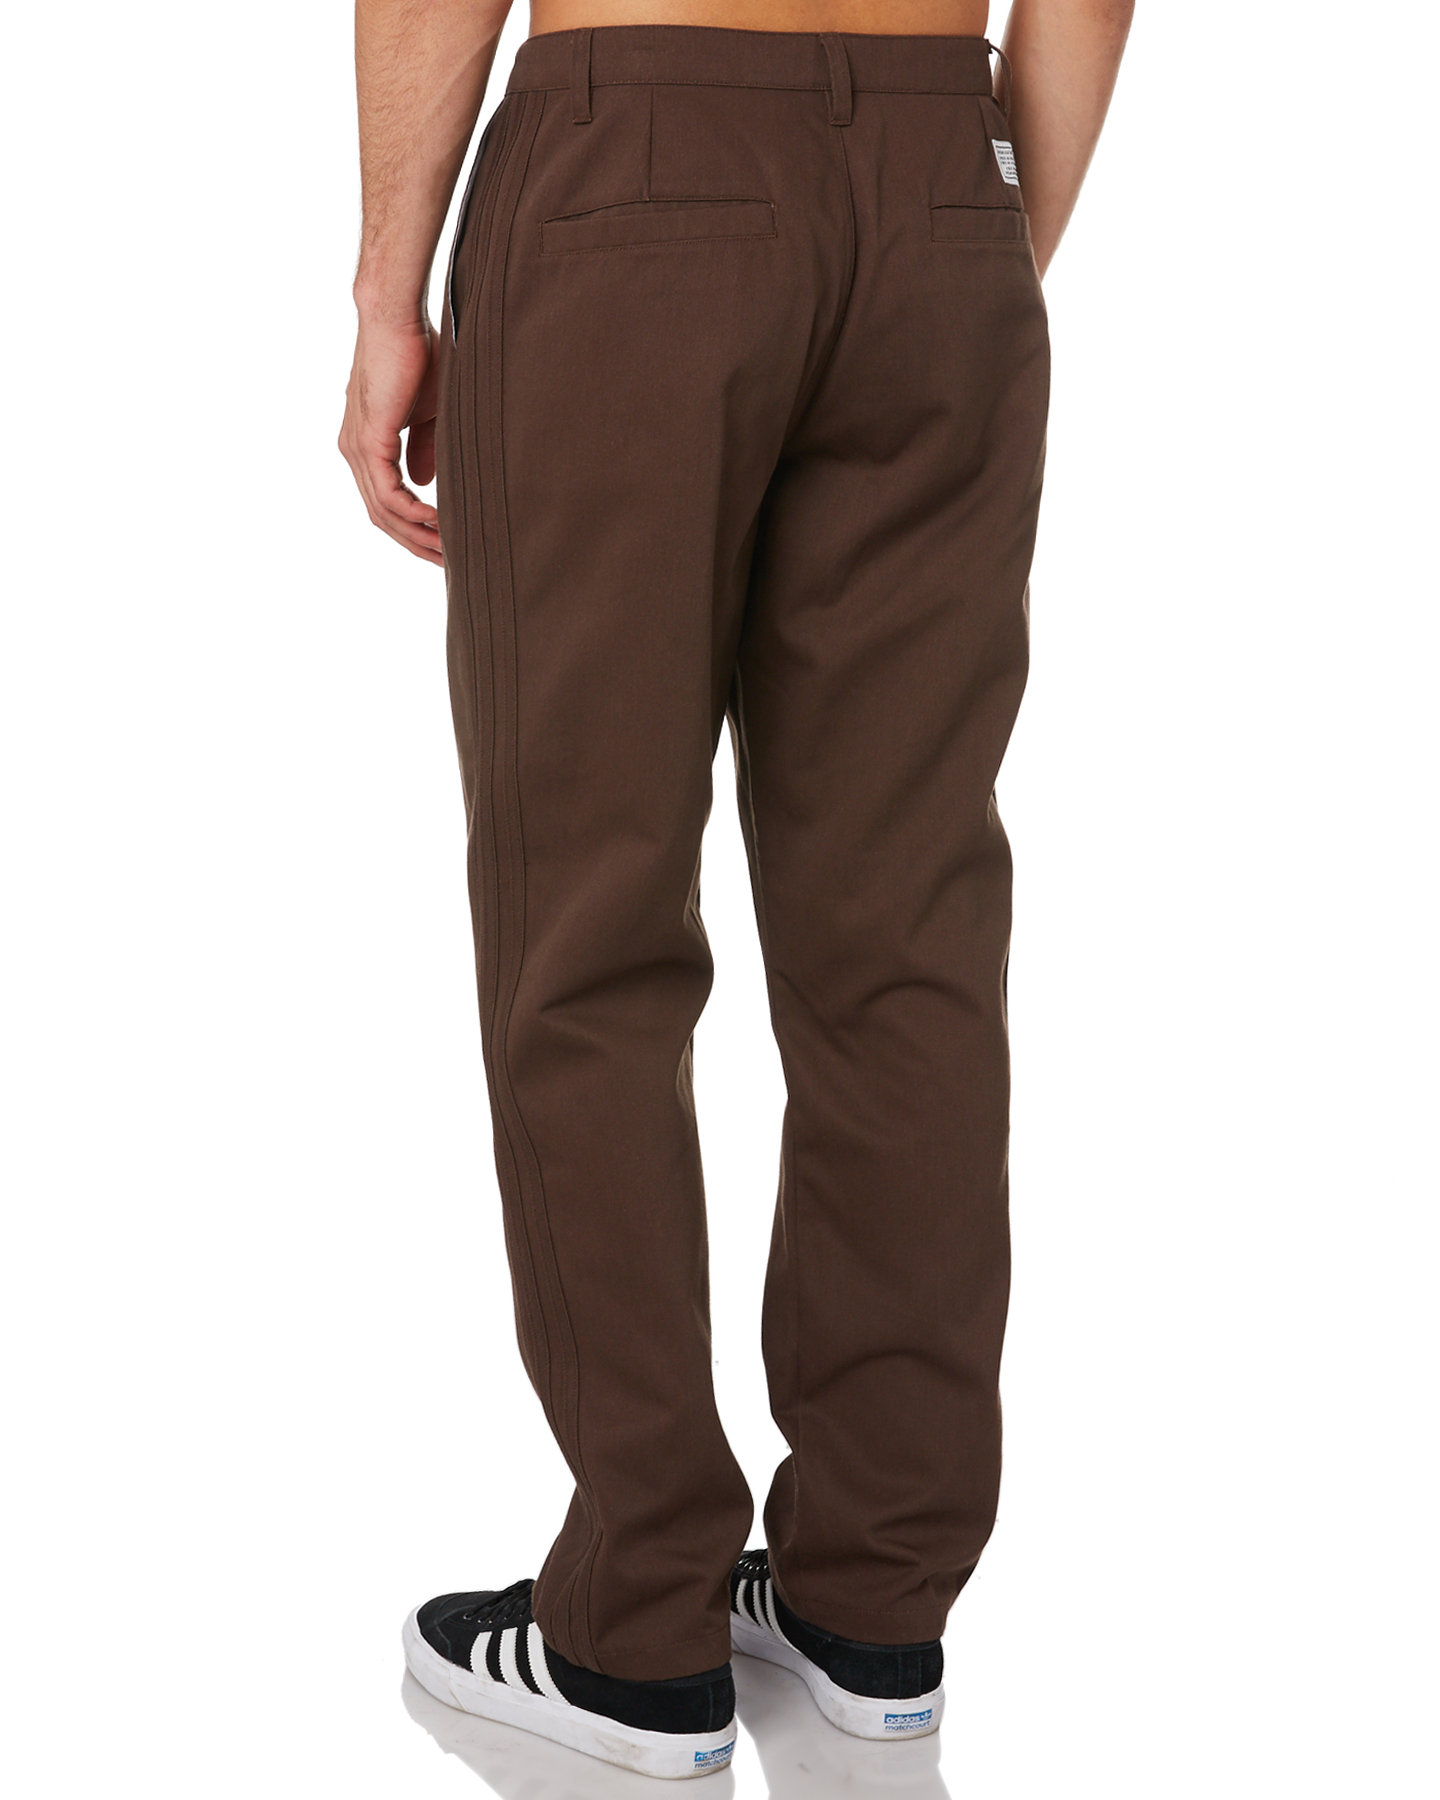 Adidas Striped Chino Mens Pant - Brown | SurfStitch